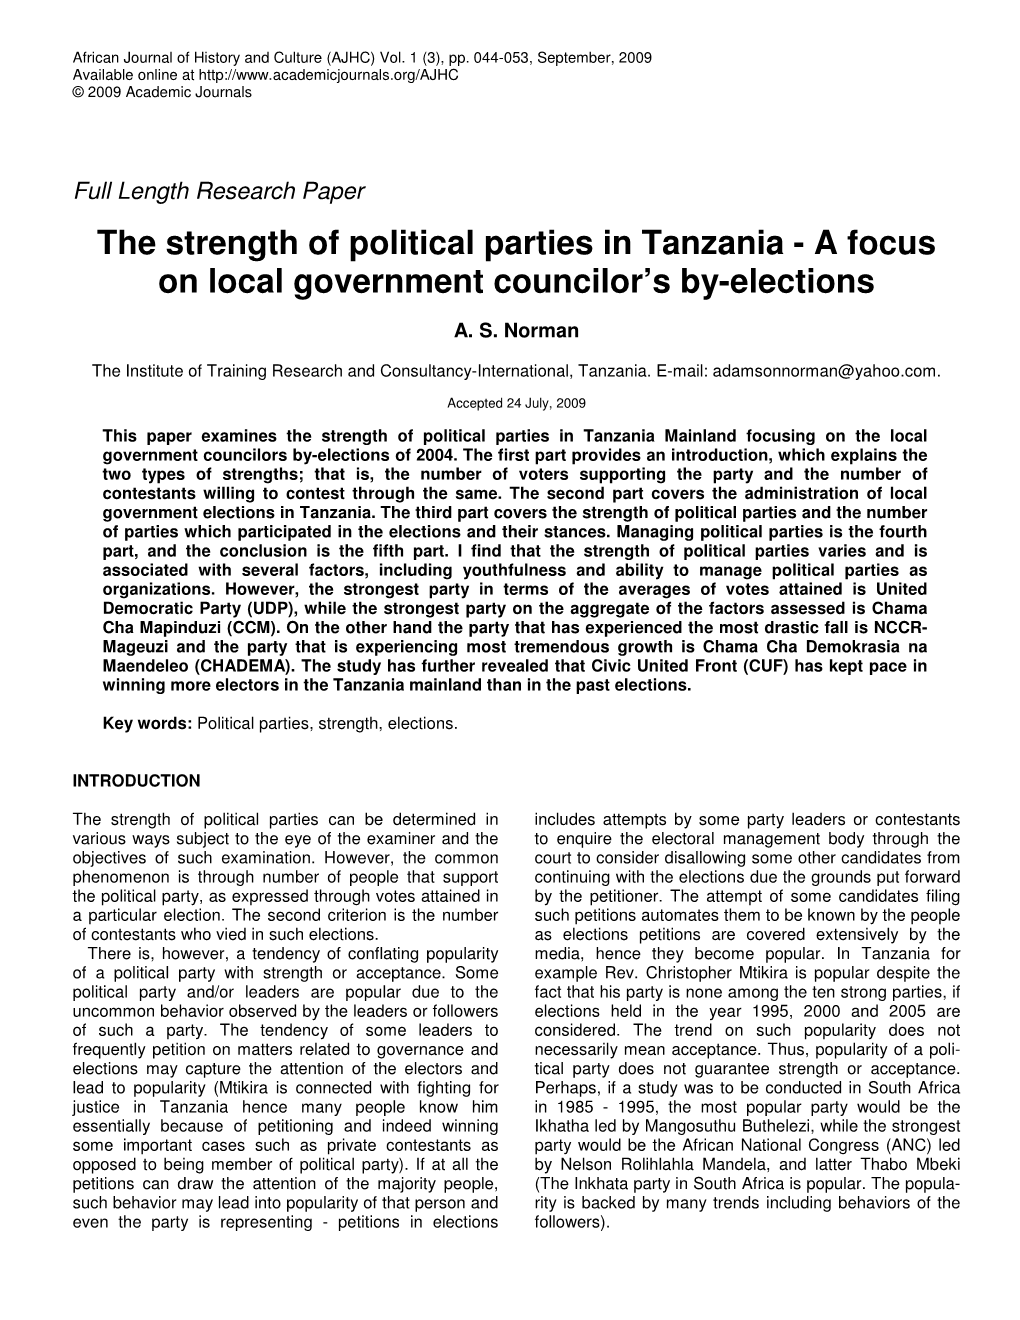 The Strength of Political Parties in Tanzania - a Focus on Local Government Councilor’S By-Elections